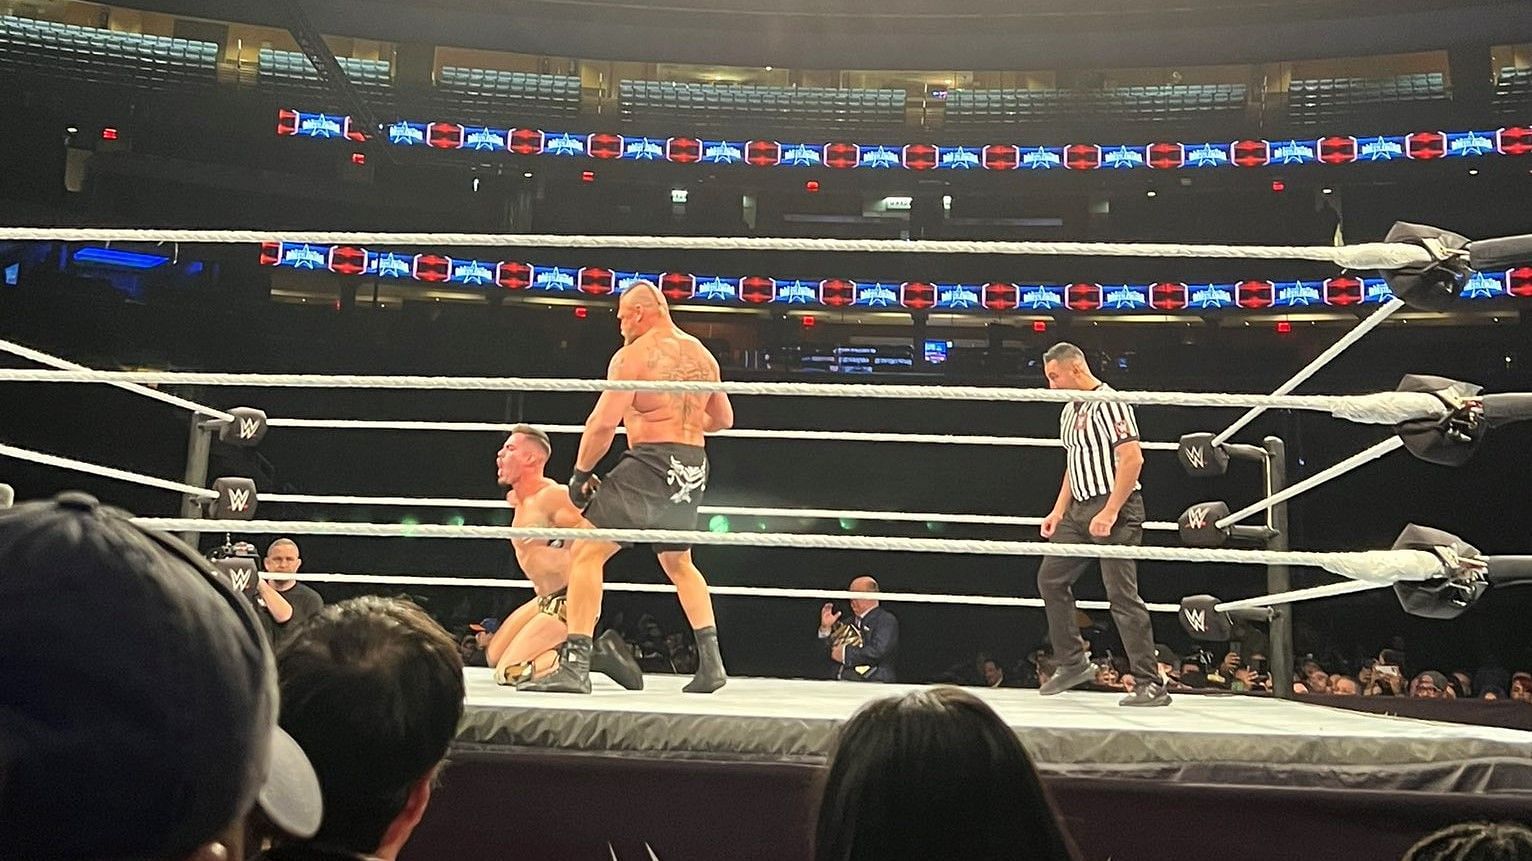 Austin Theory was no match for Brock Lesnar at the MSG. (credits Twitter user @FabulousBoss_)